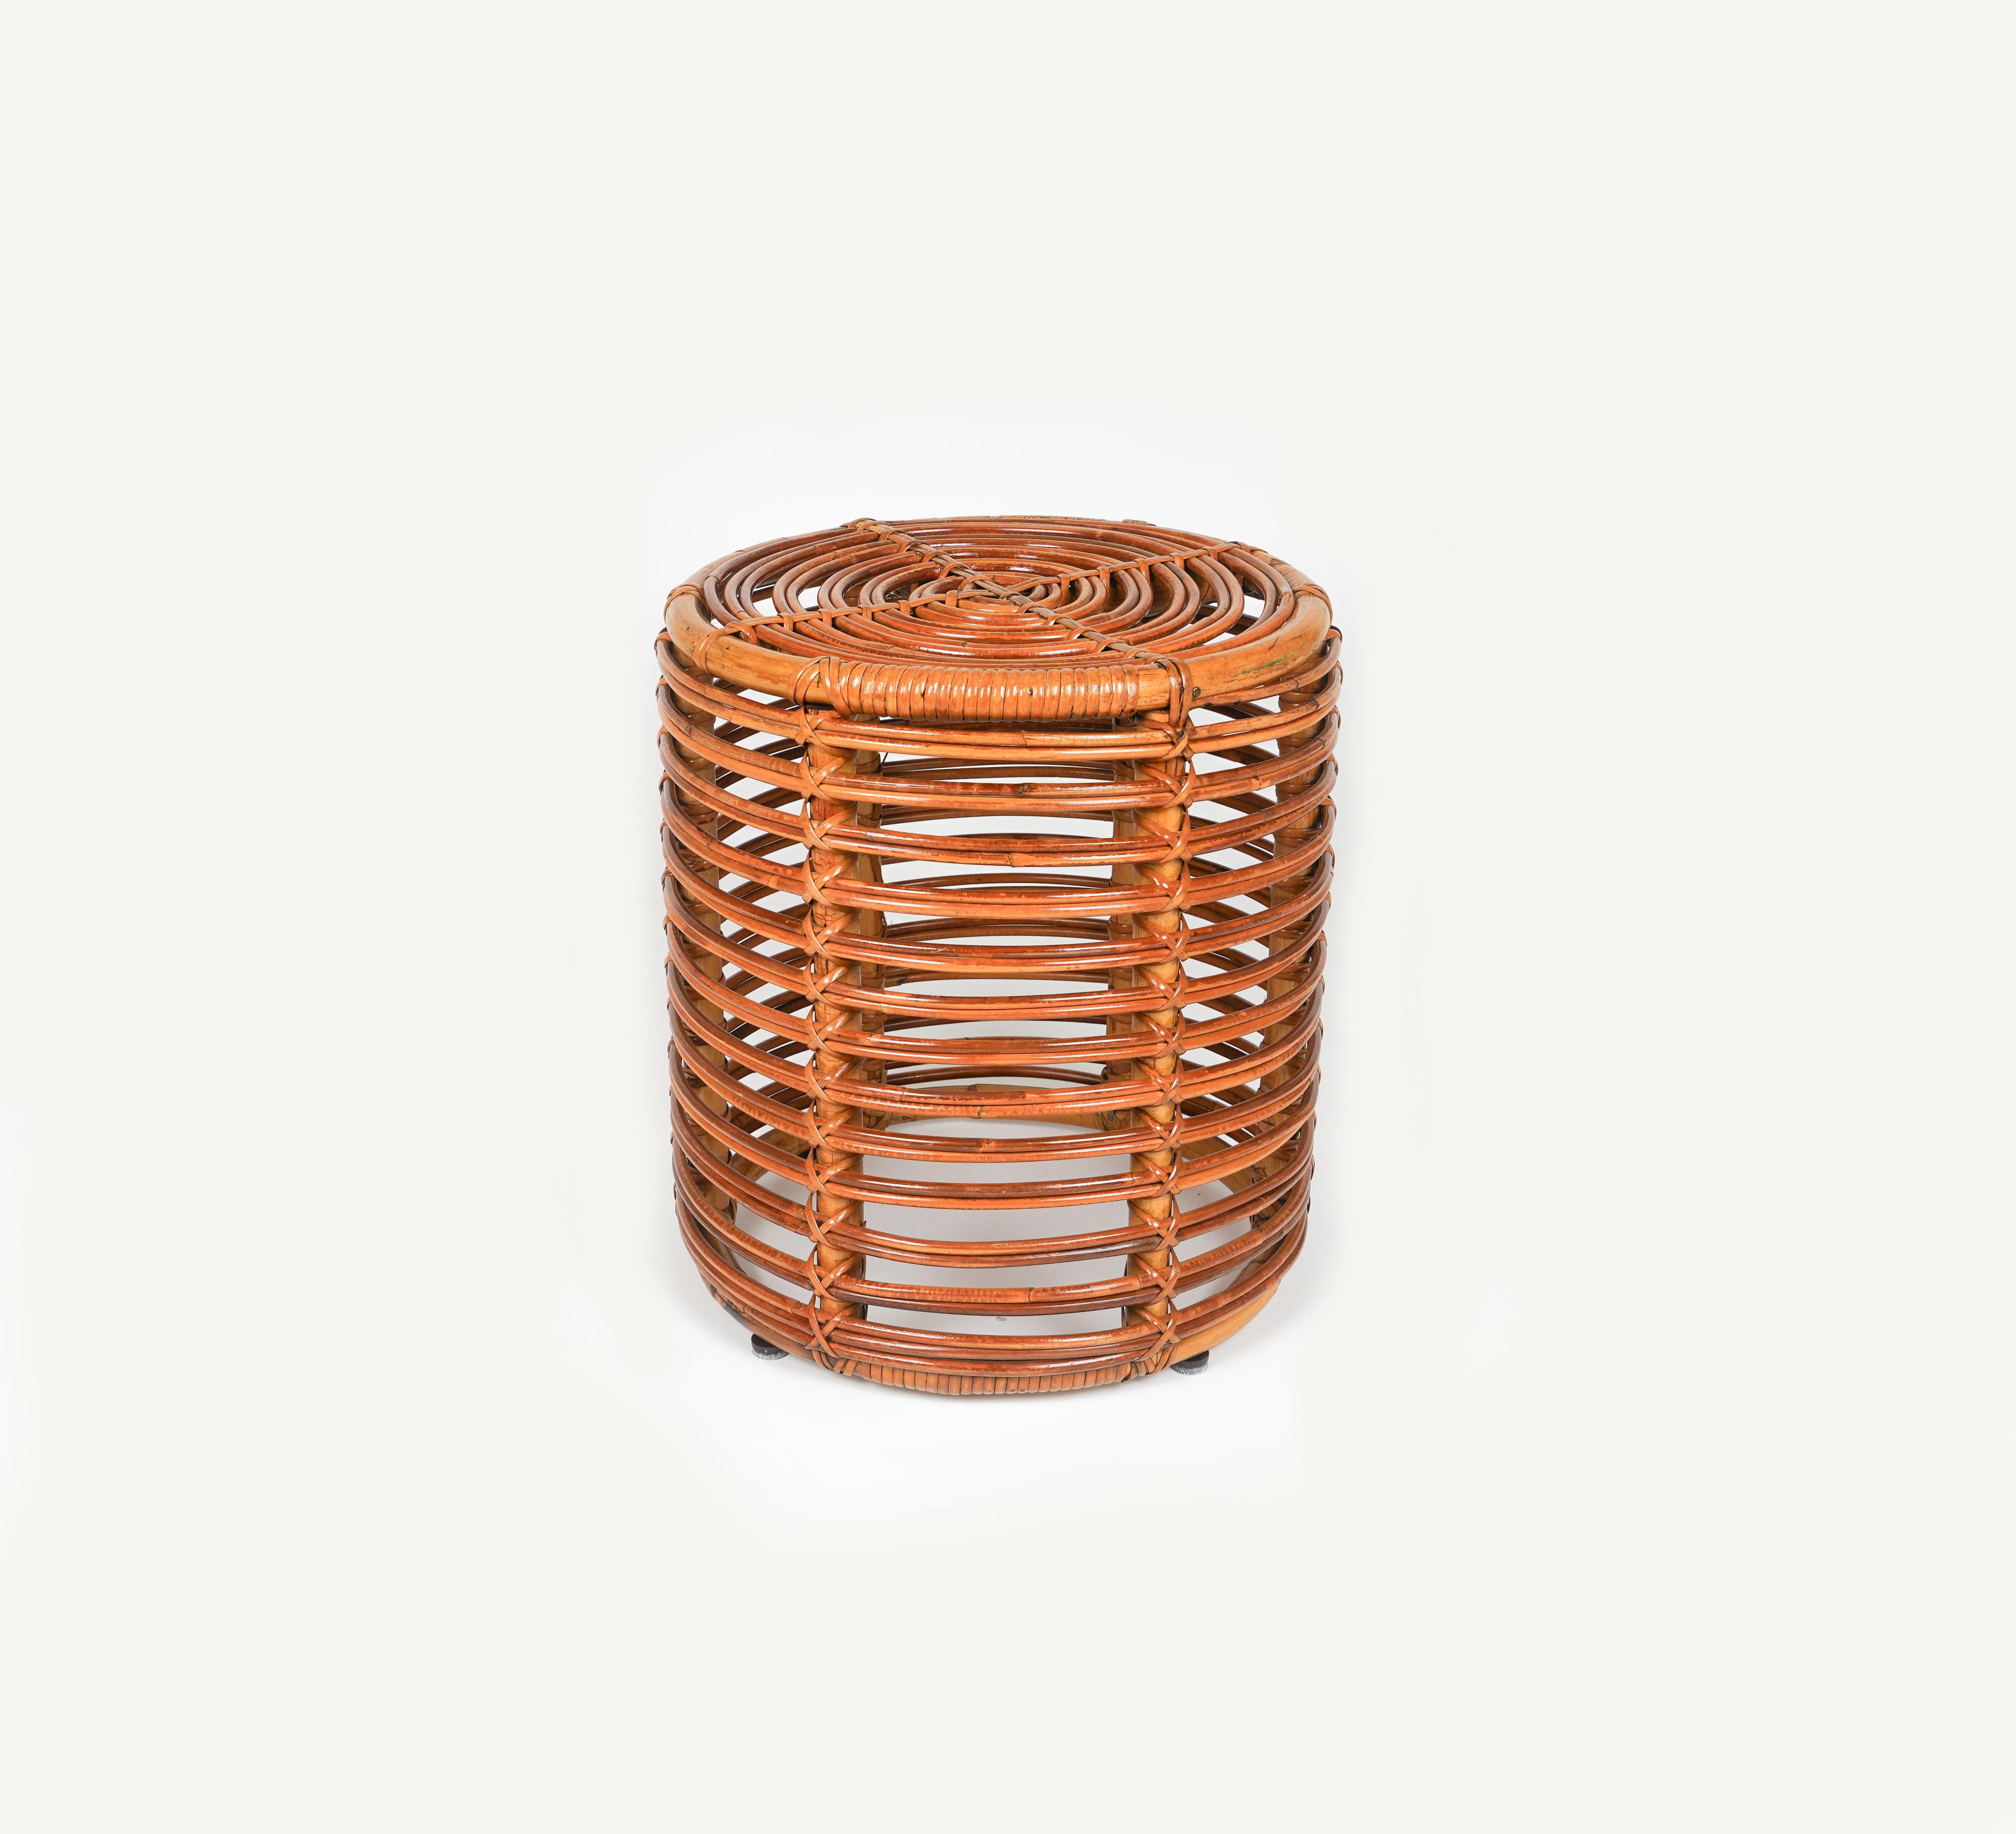 Mid-Century Modern Midcentury Rattan and Bamboo Stool Pouf Tito Agnoli, Italy 1960s For Sale